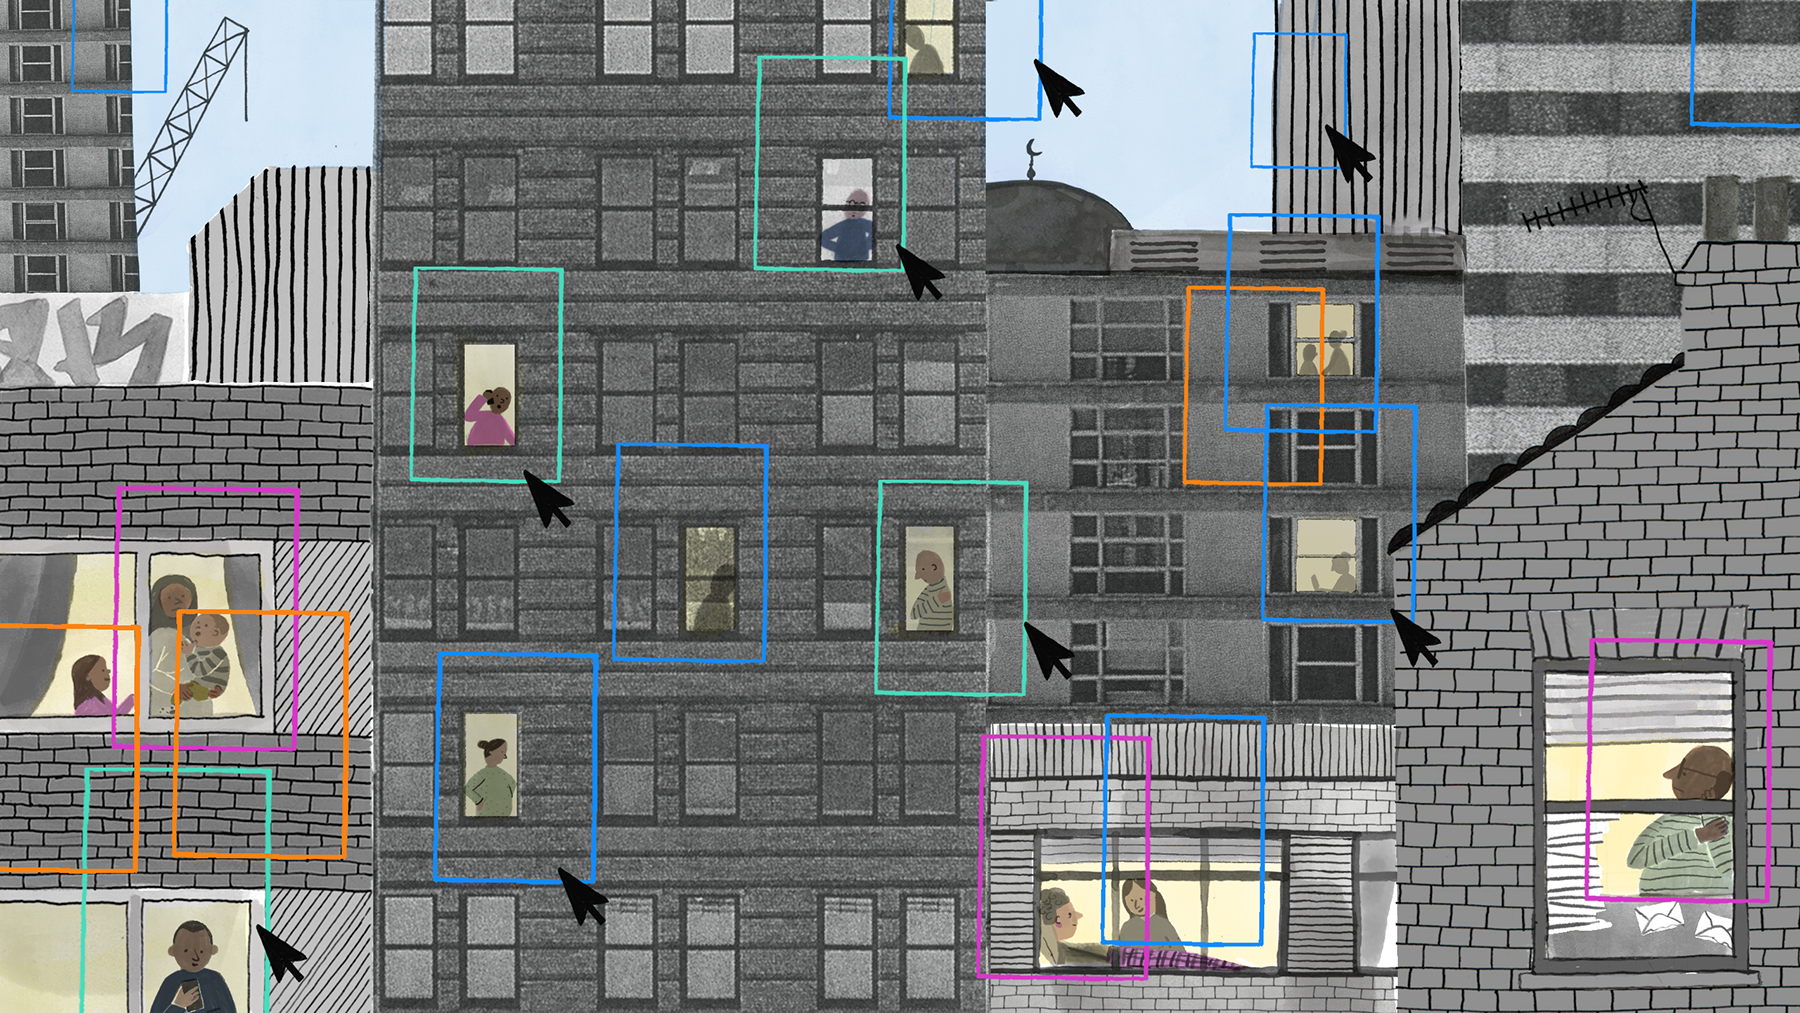 Illustration showing people living in blocks of flats and houses in an urban environment.